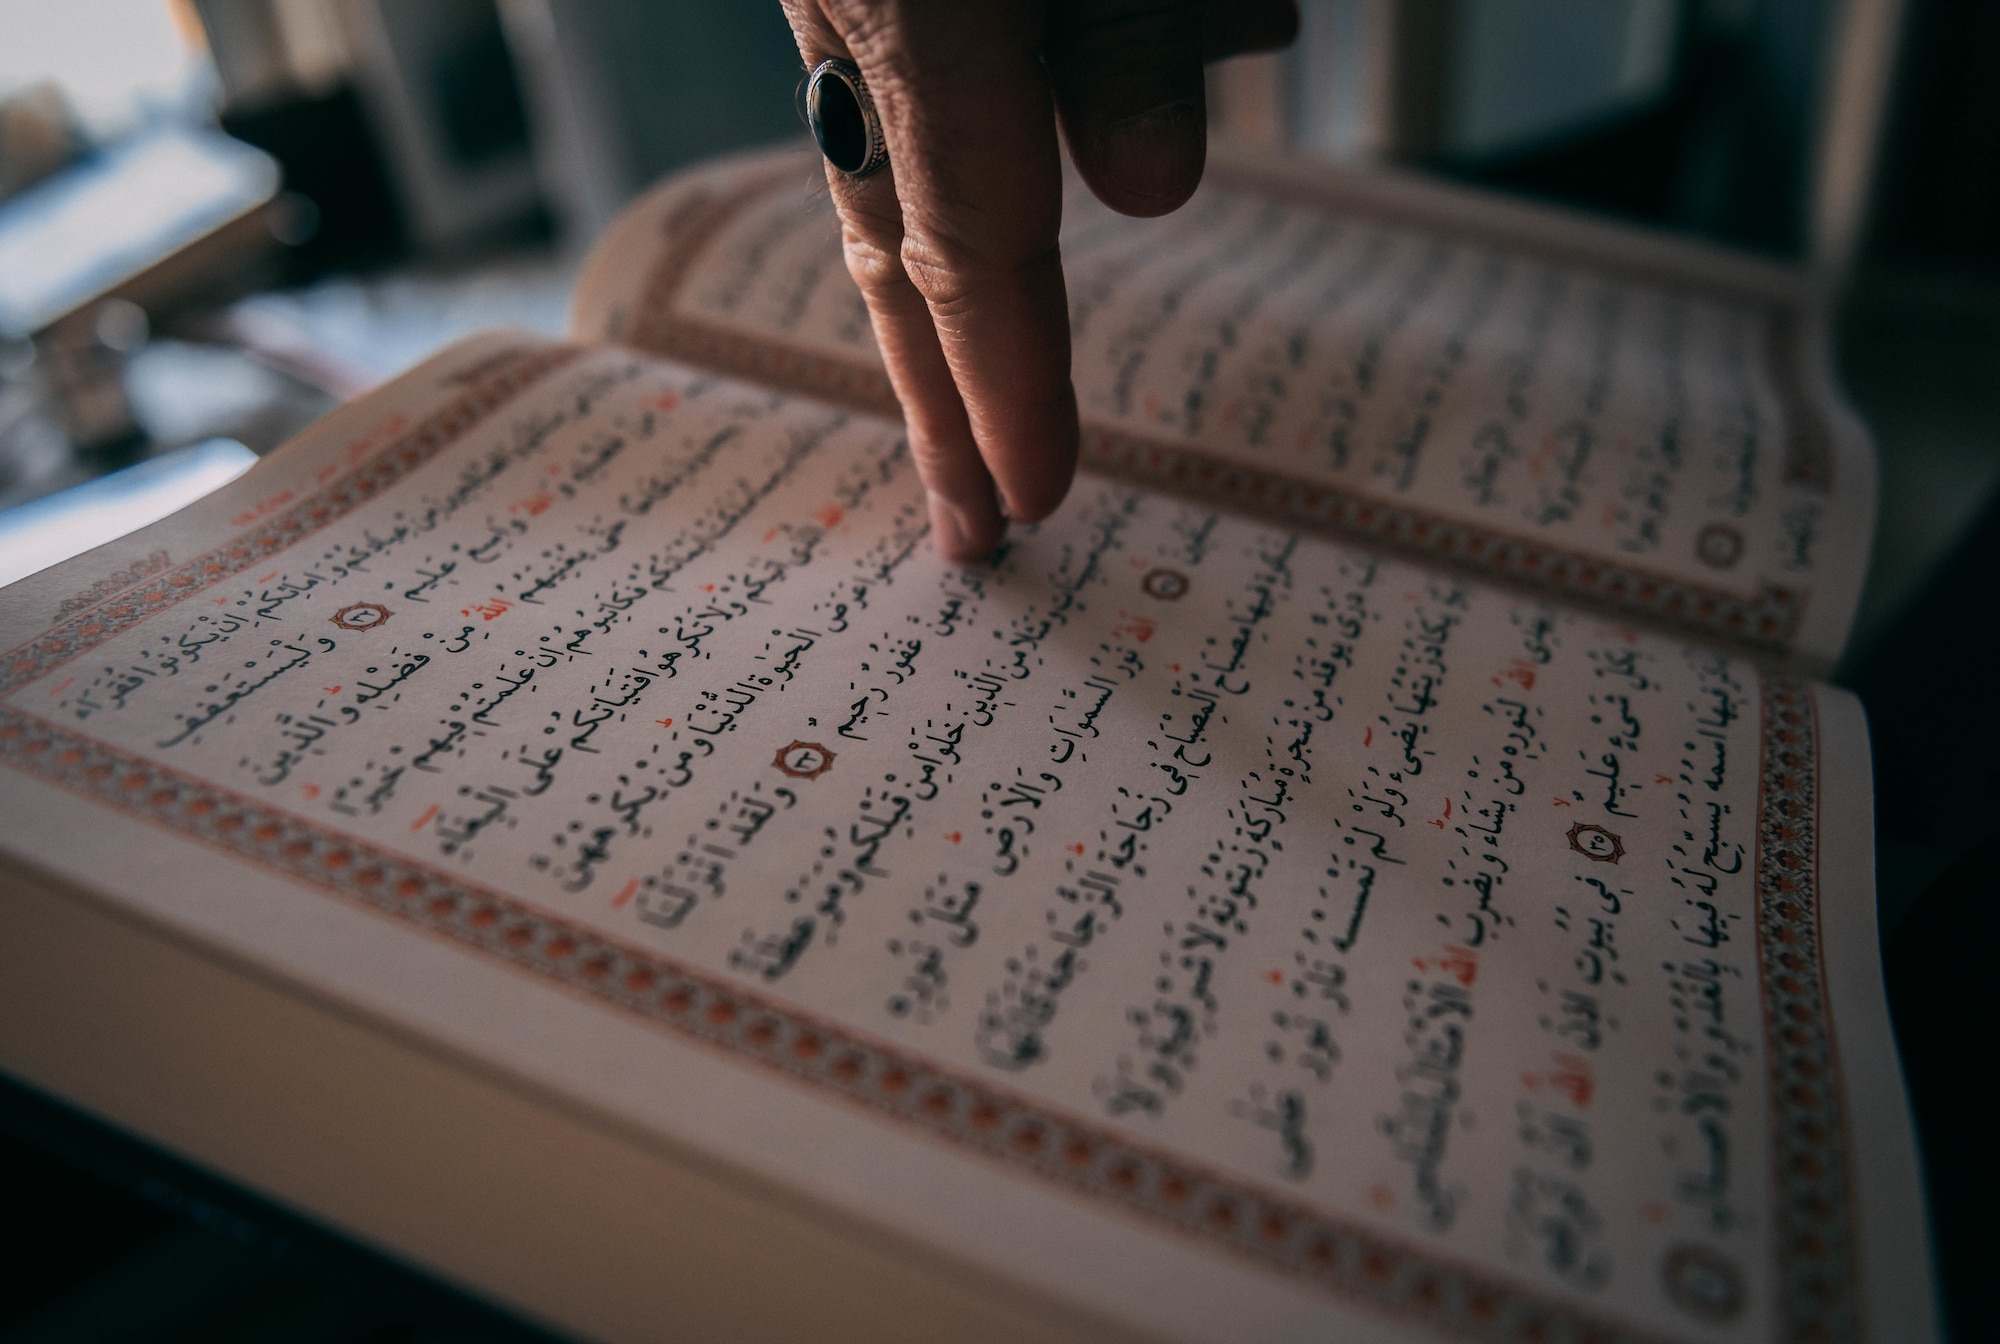 Muslims should read 1/30 of the Holy Quran each day to complete the reading of the Quran over this 30-day fast period. (U.S. Air Force photo by Staff Sgt. Alexander Cook)